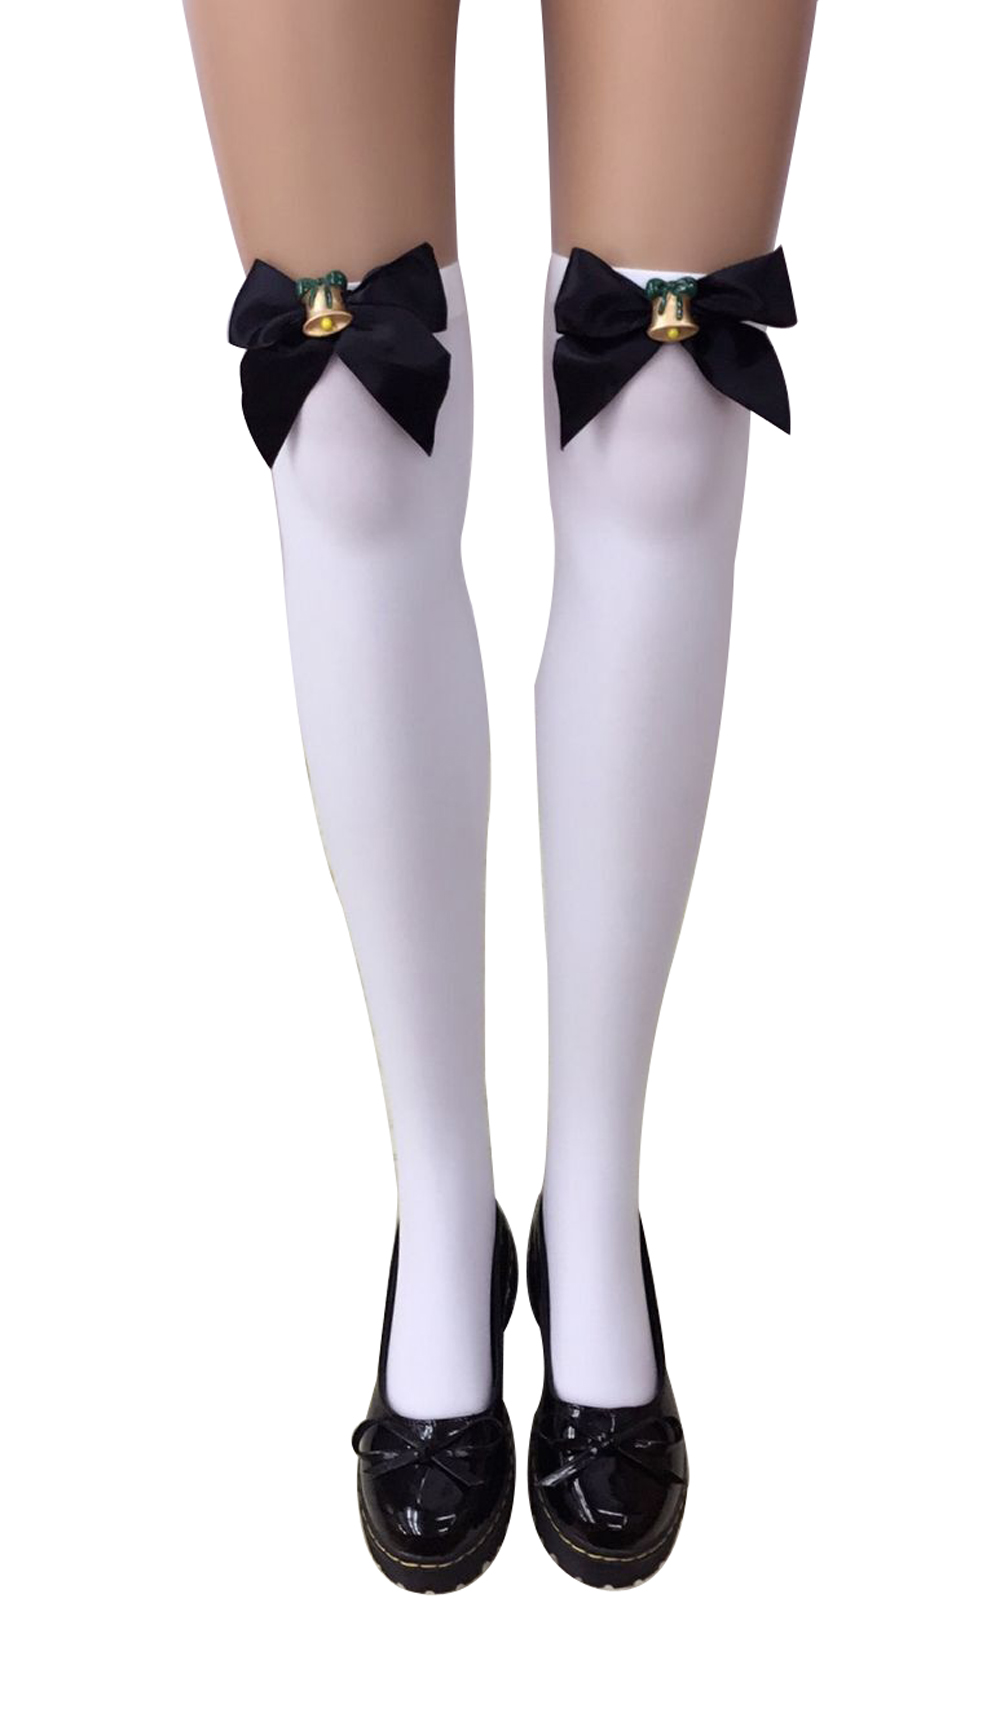 F8196-4 Womens Thigh High Stockings Opaque Tights Over the Knee Nylon Socks